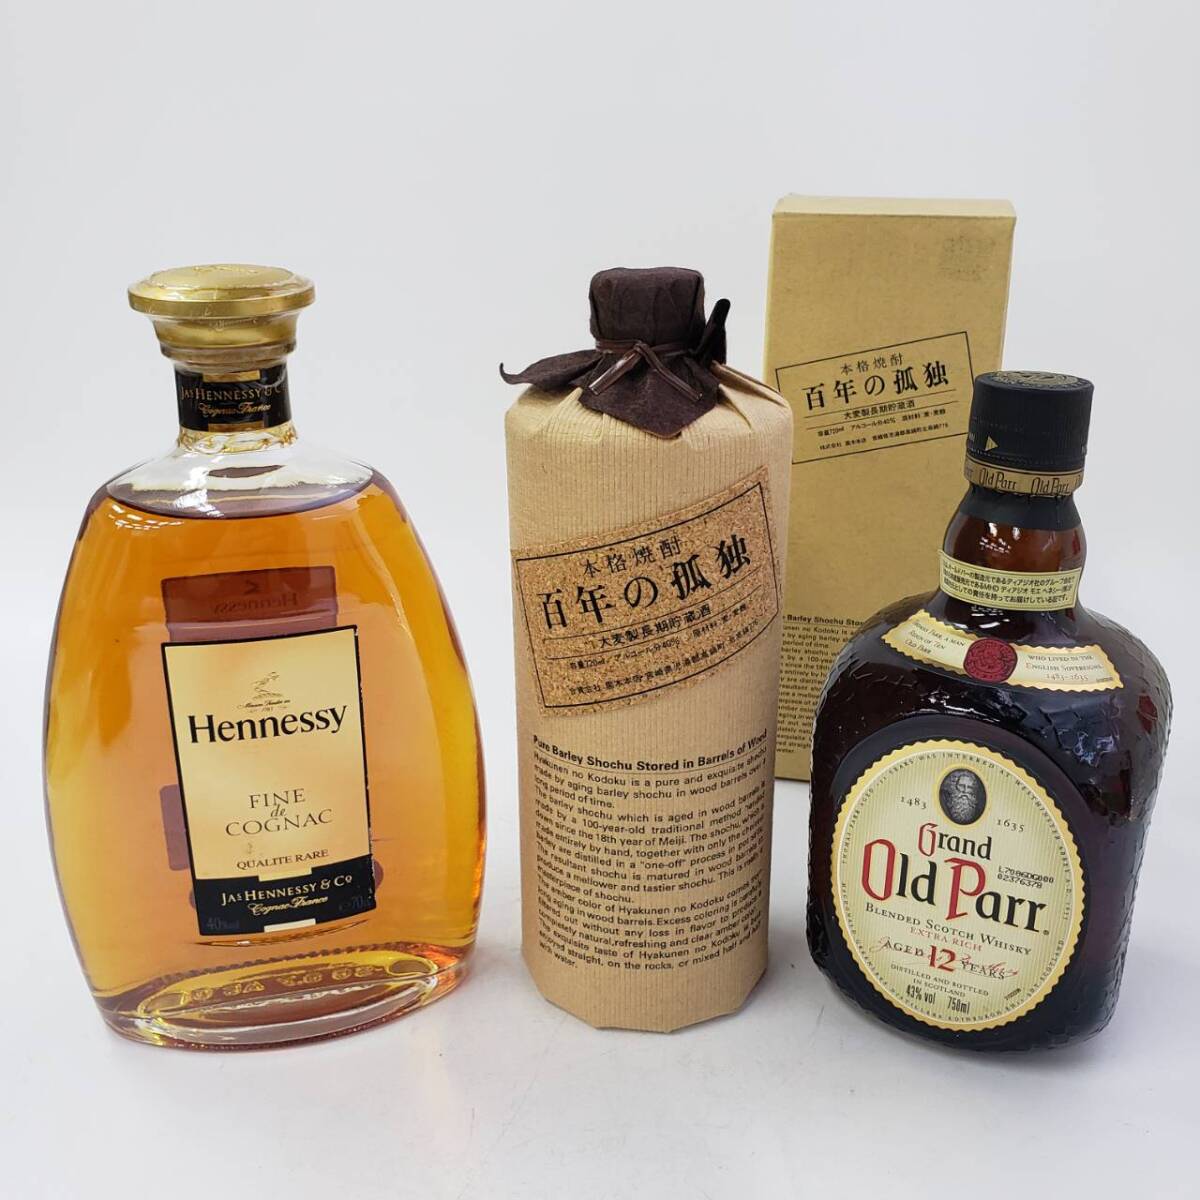 M35591(054)-609/TH5000[ Chiba prefecture inside . shipping ] sake * including in a package un- possible 3ps.@ summarize Hennessy FINE de COGNAC/ classical shochu One Hundred Years of Solitude /Gland Old Parr 12 year 